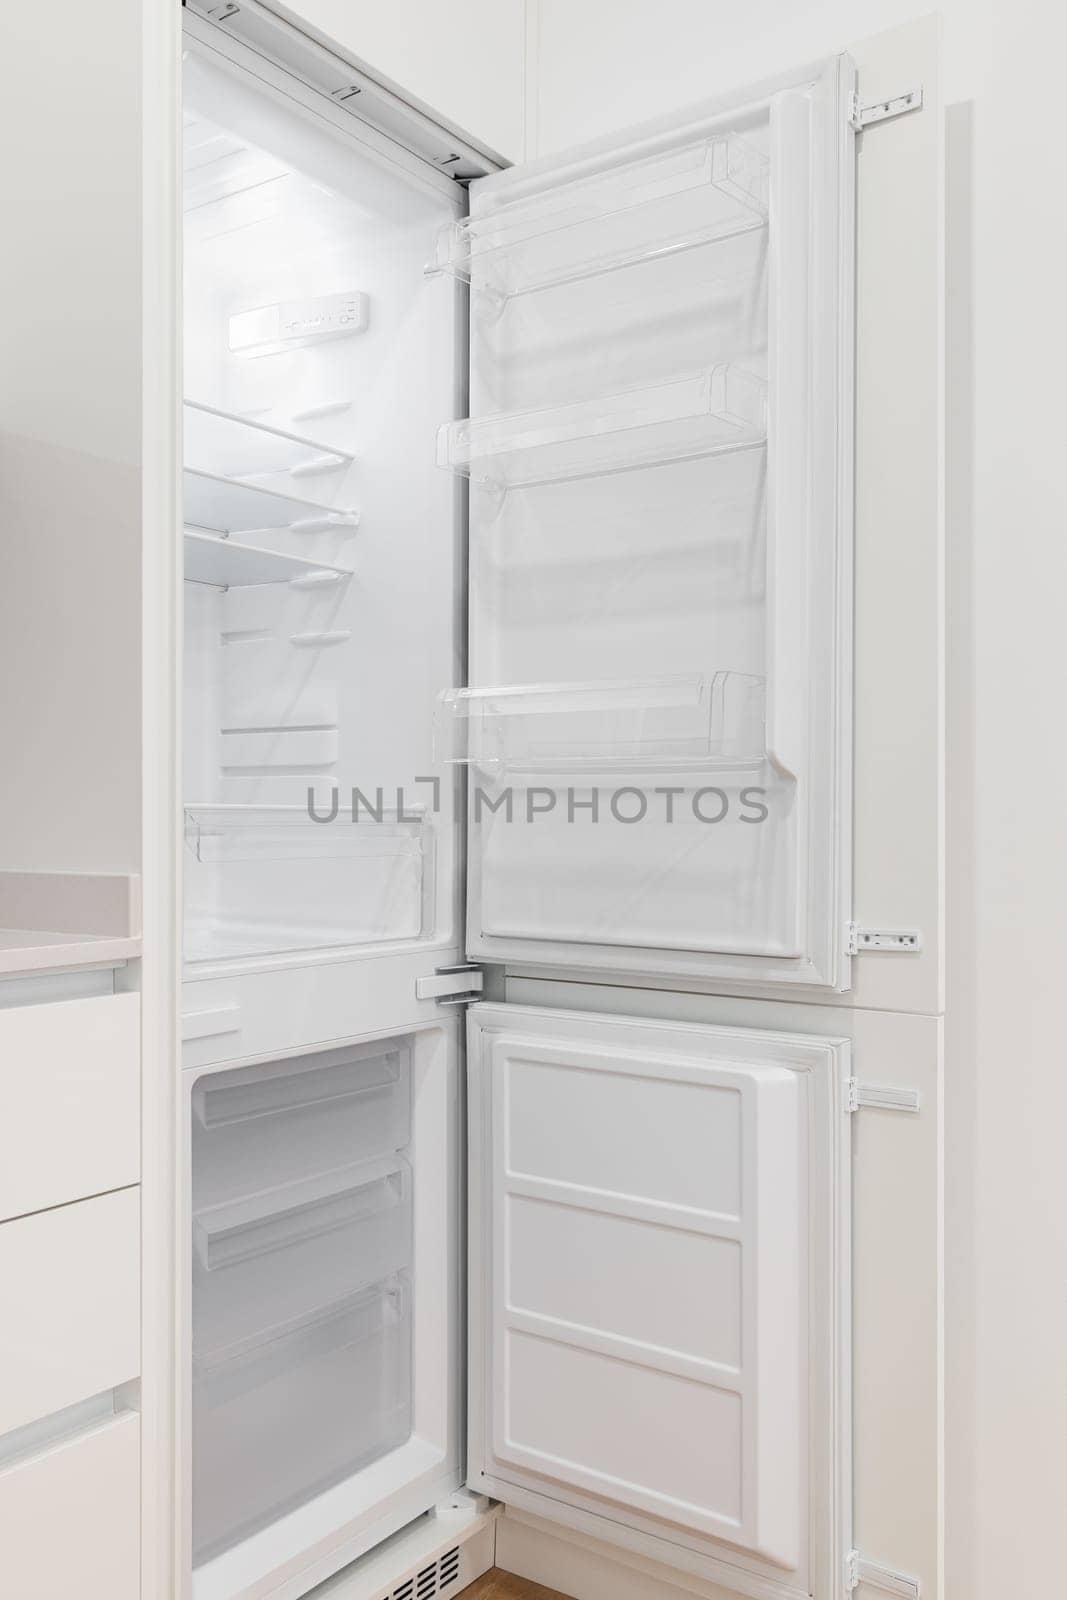 Photo of an open, empty and white refrigerator in a modern kitchen by apavlin